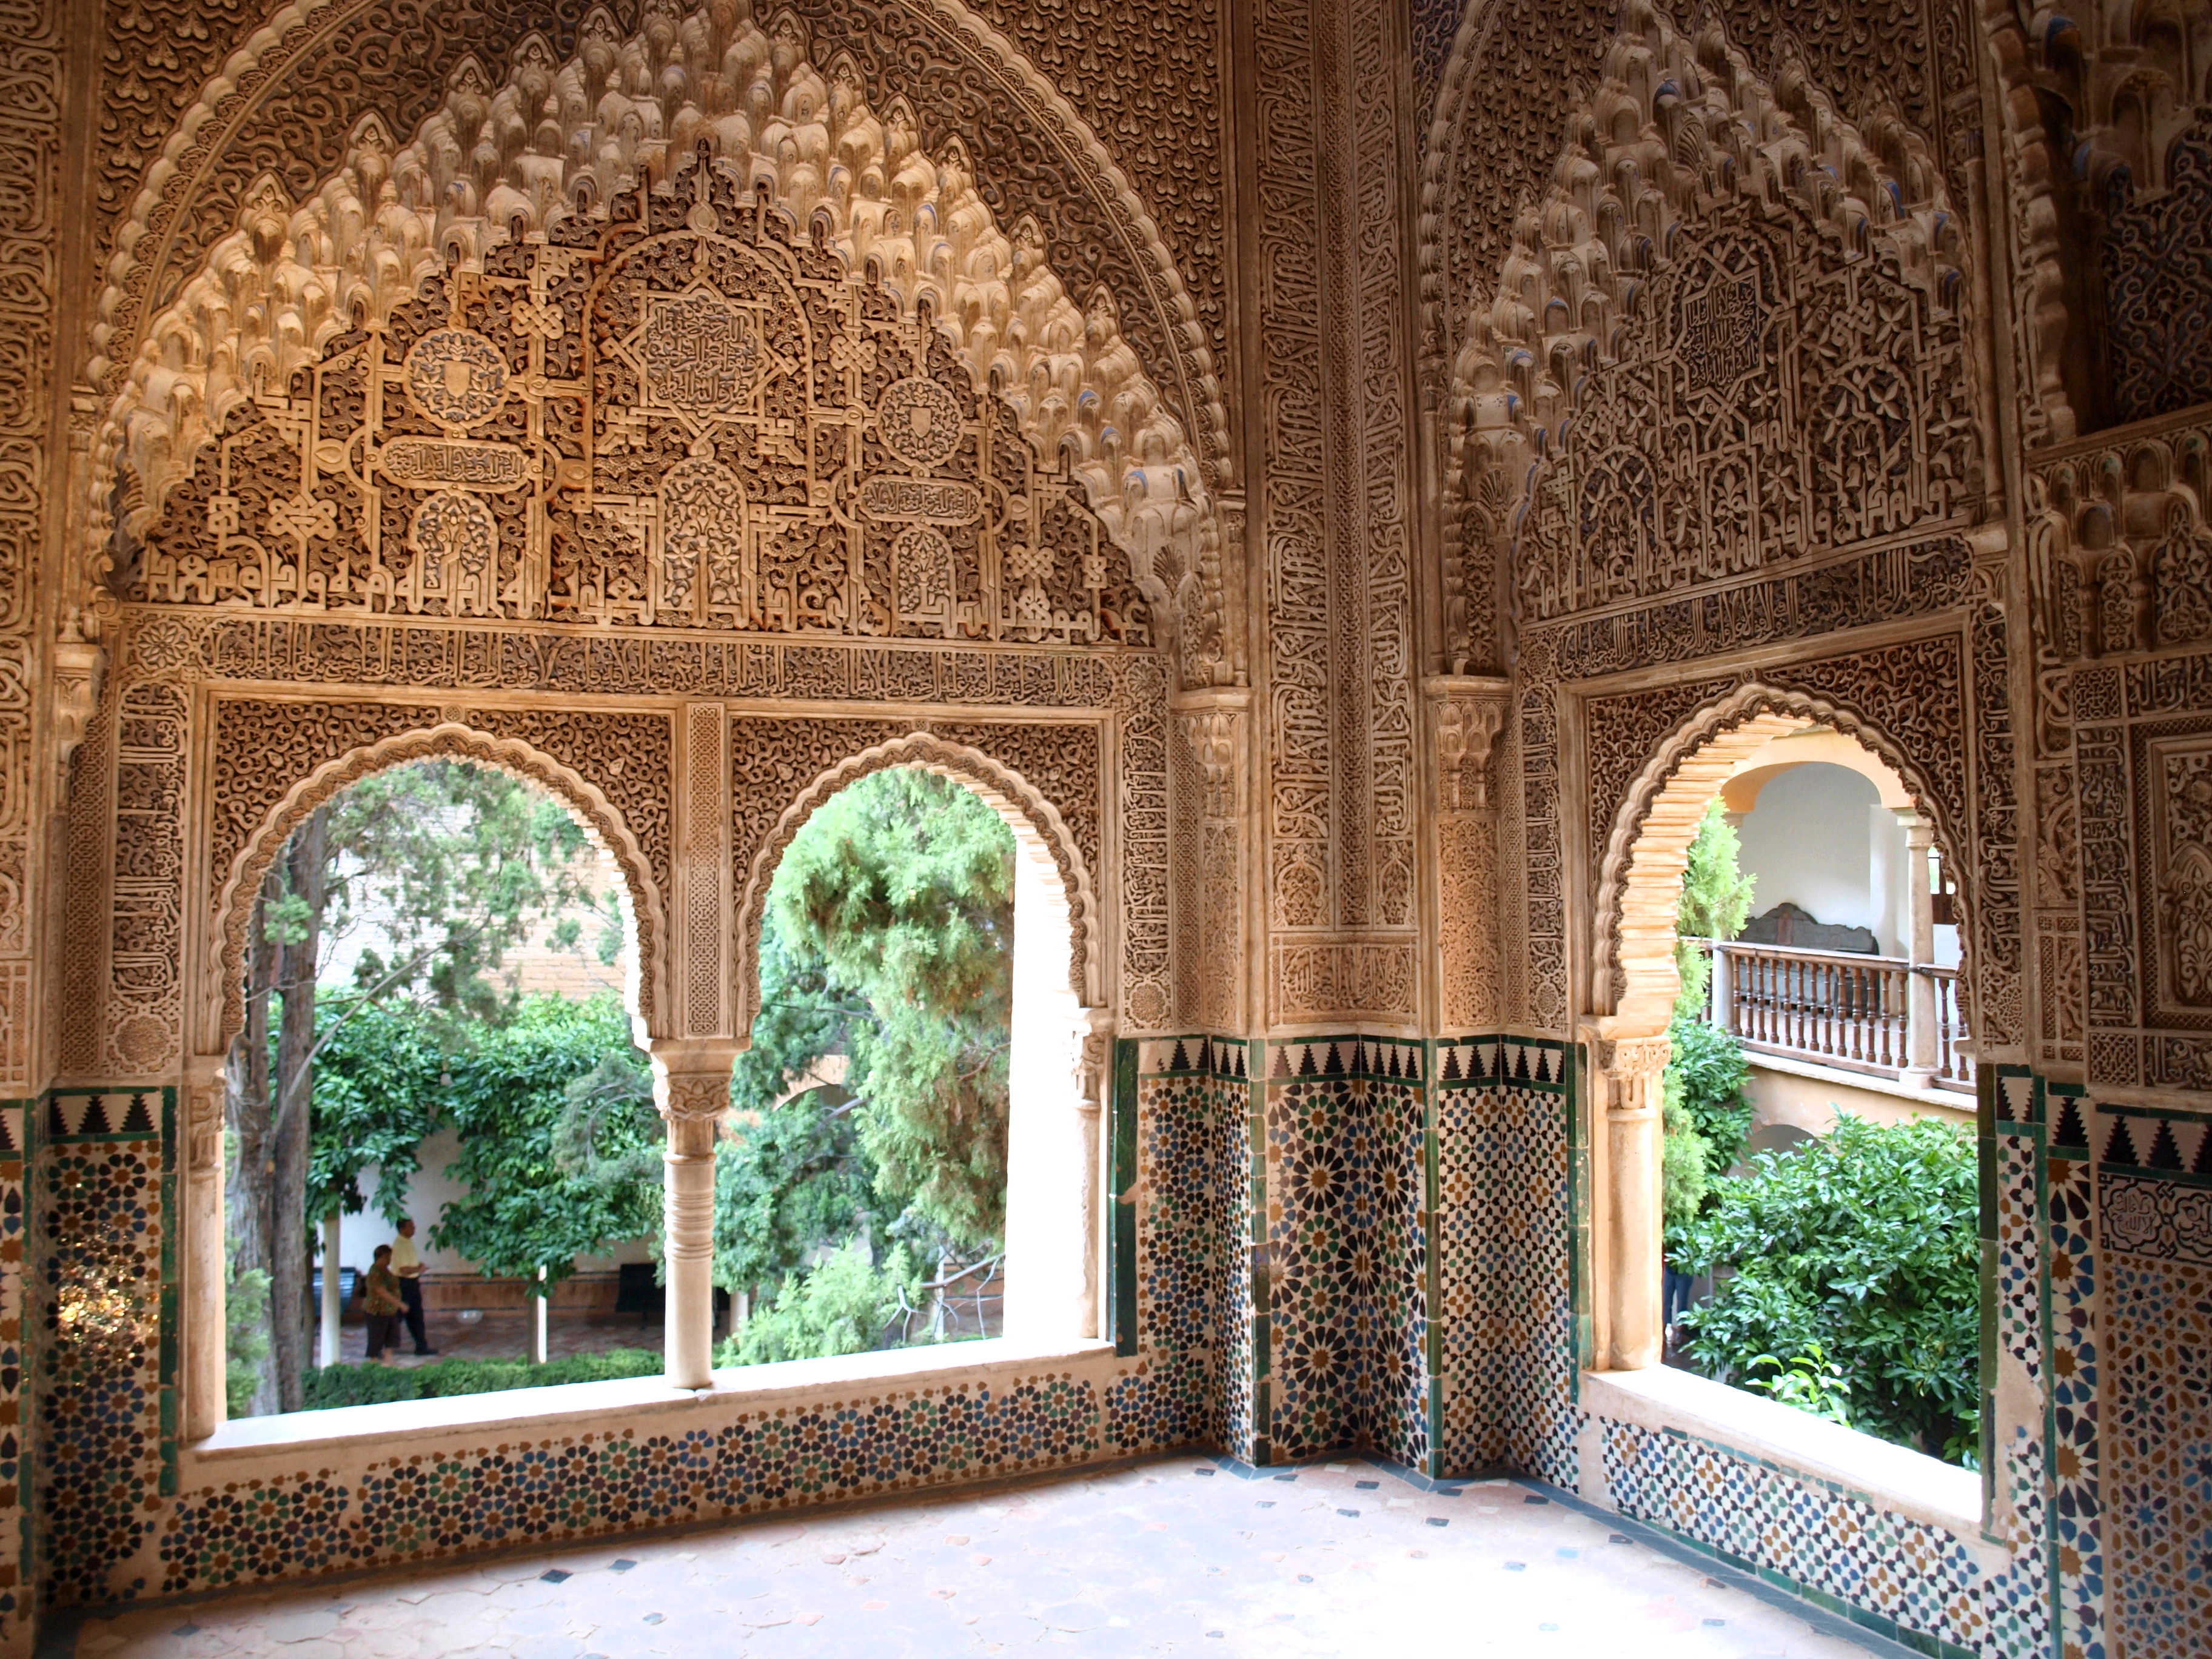 guided visit to the Alhambra in Granada